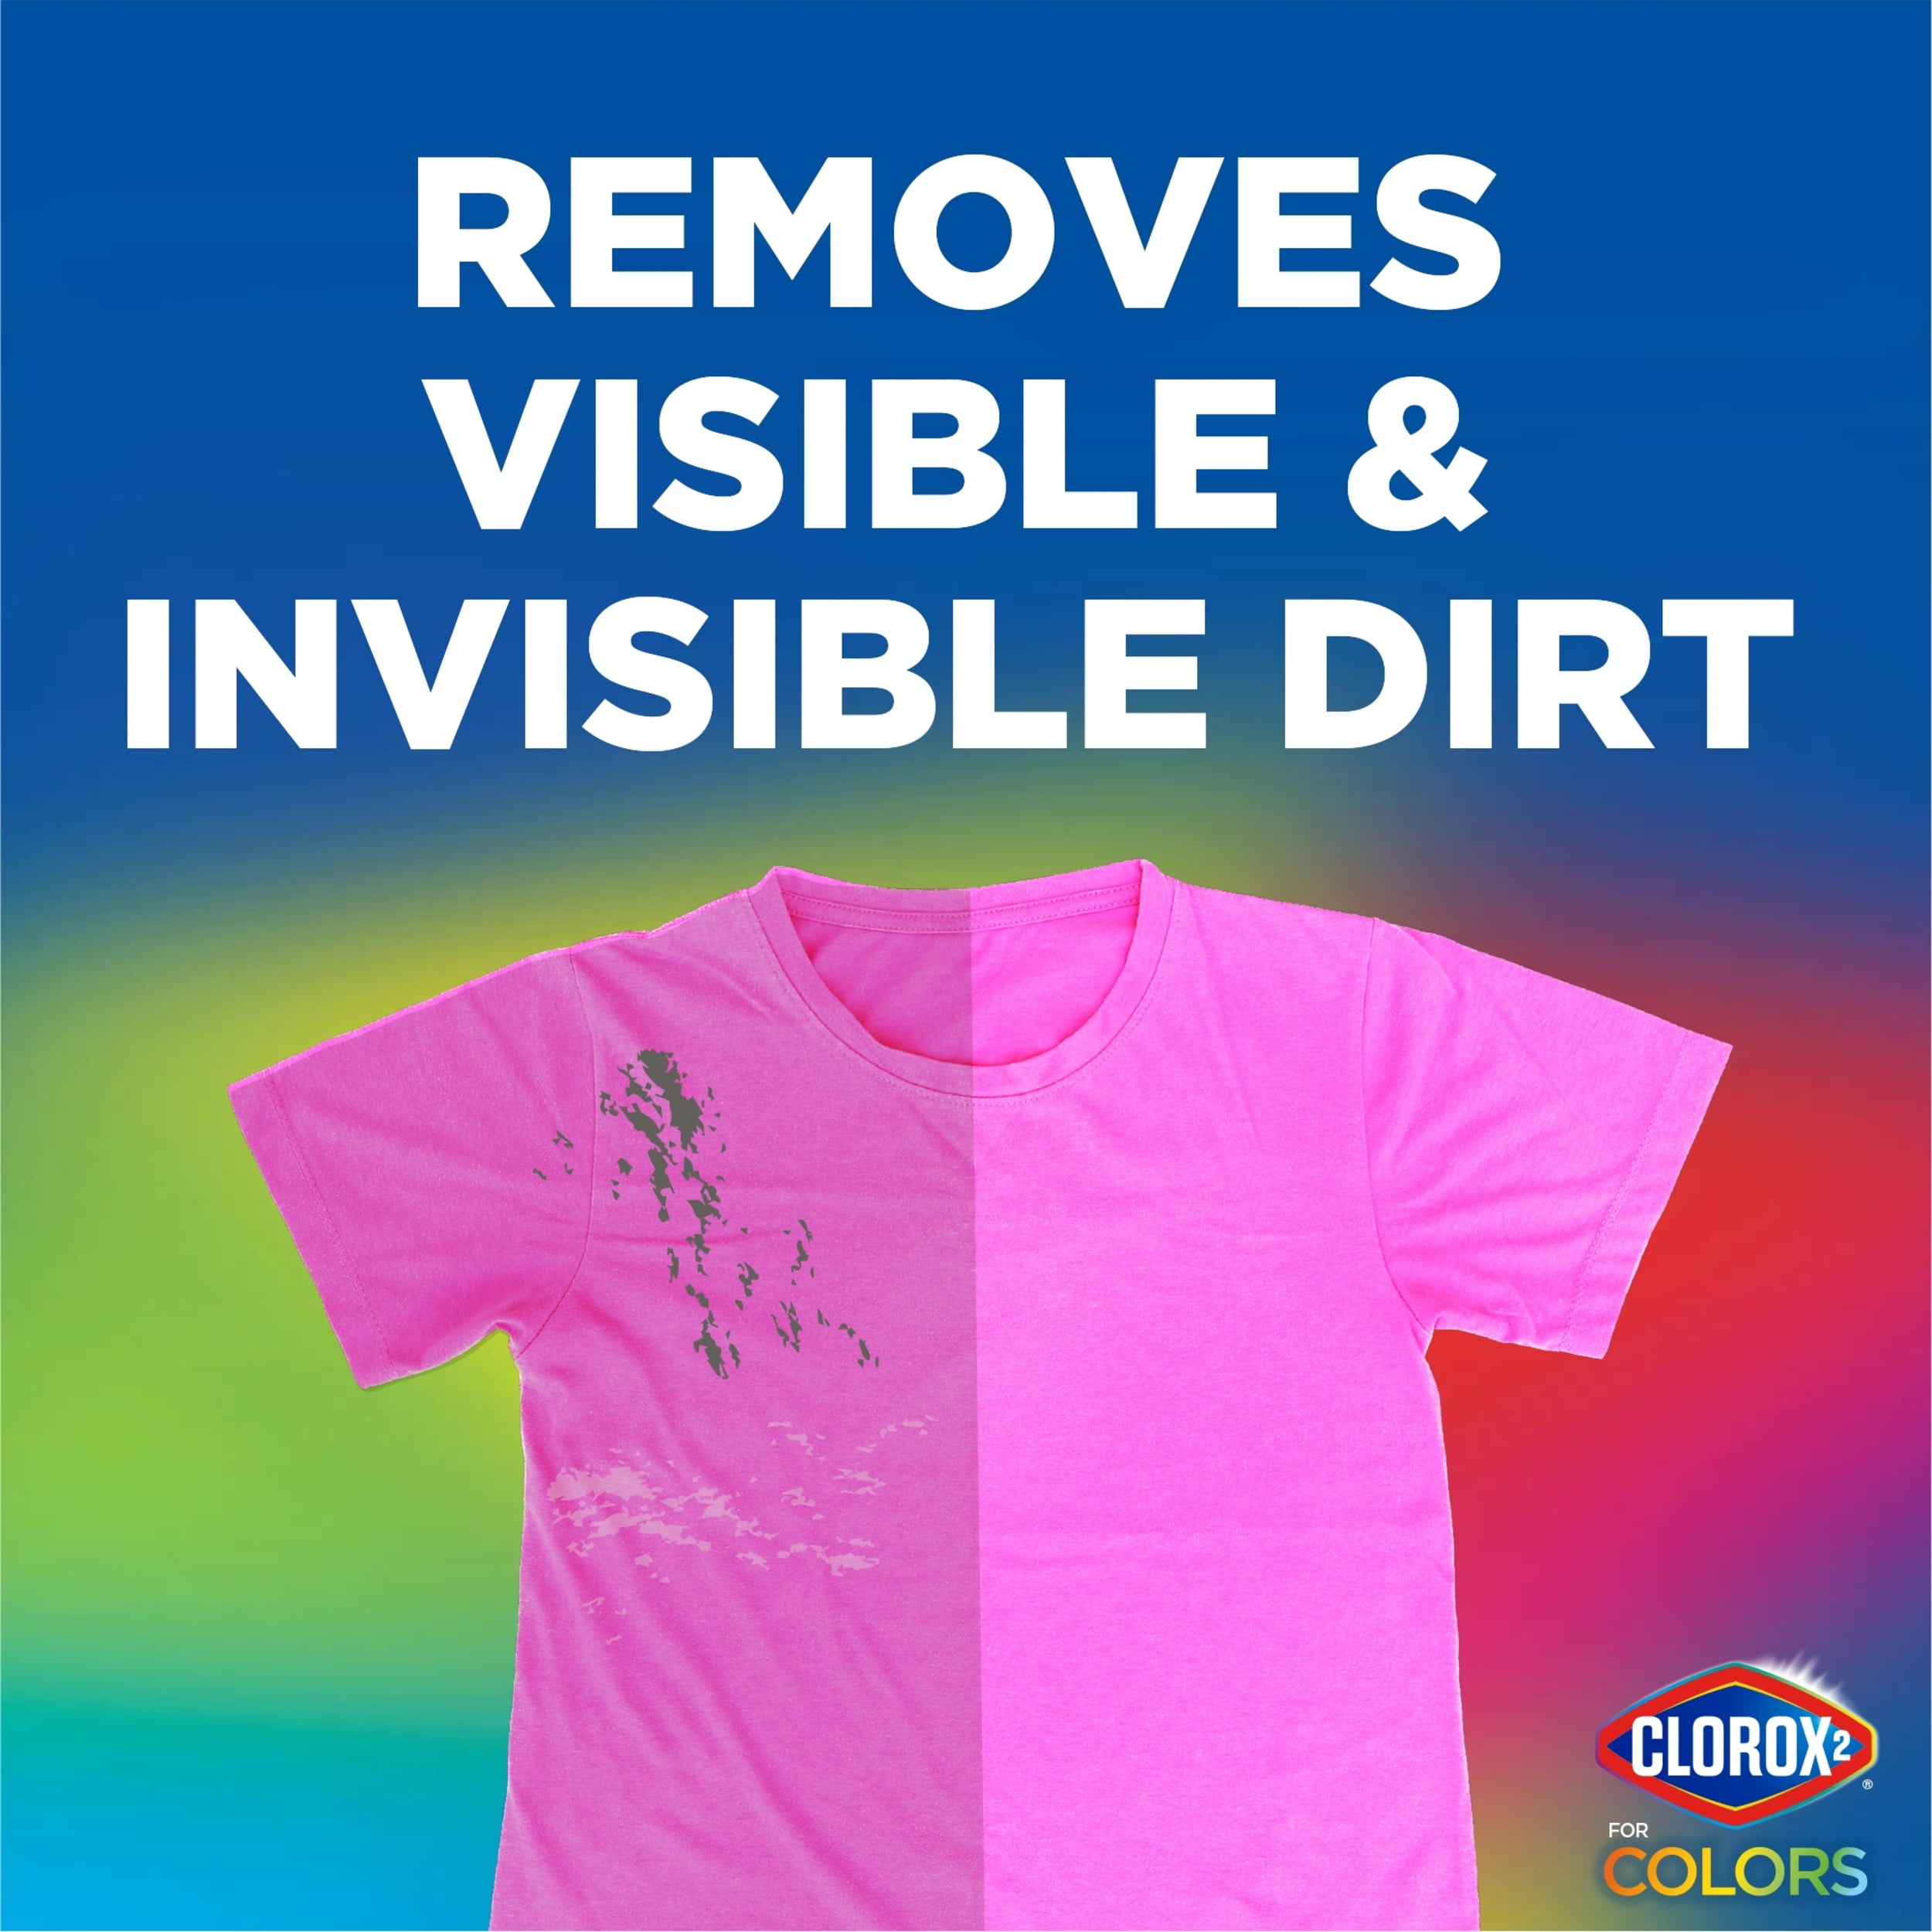 Clorox® Clothes Stain Remover & Color Booster